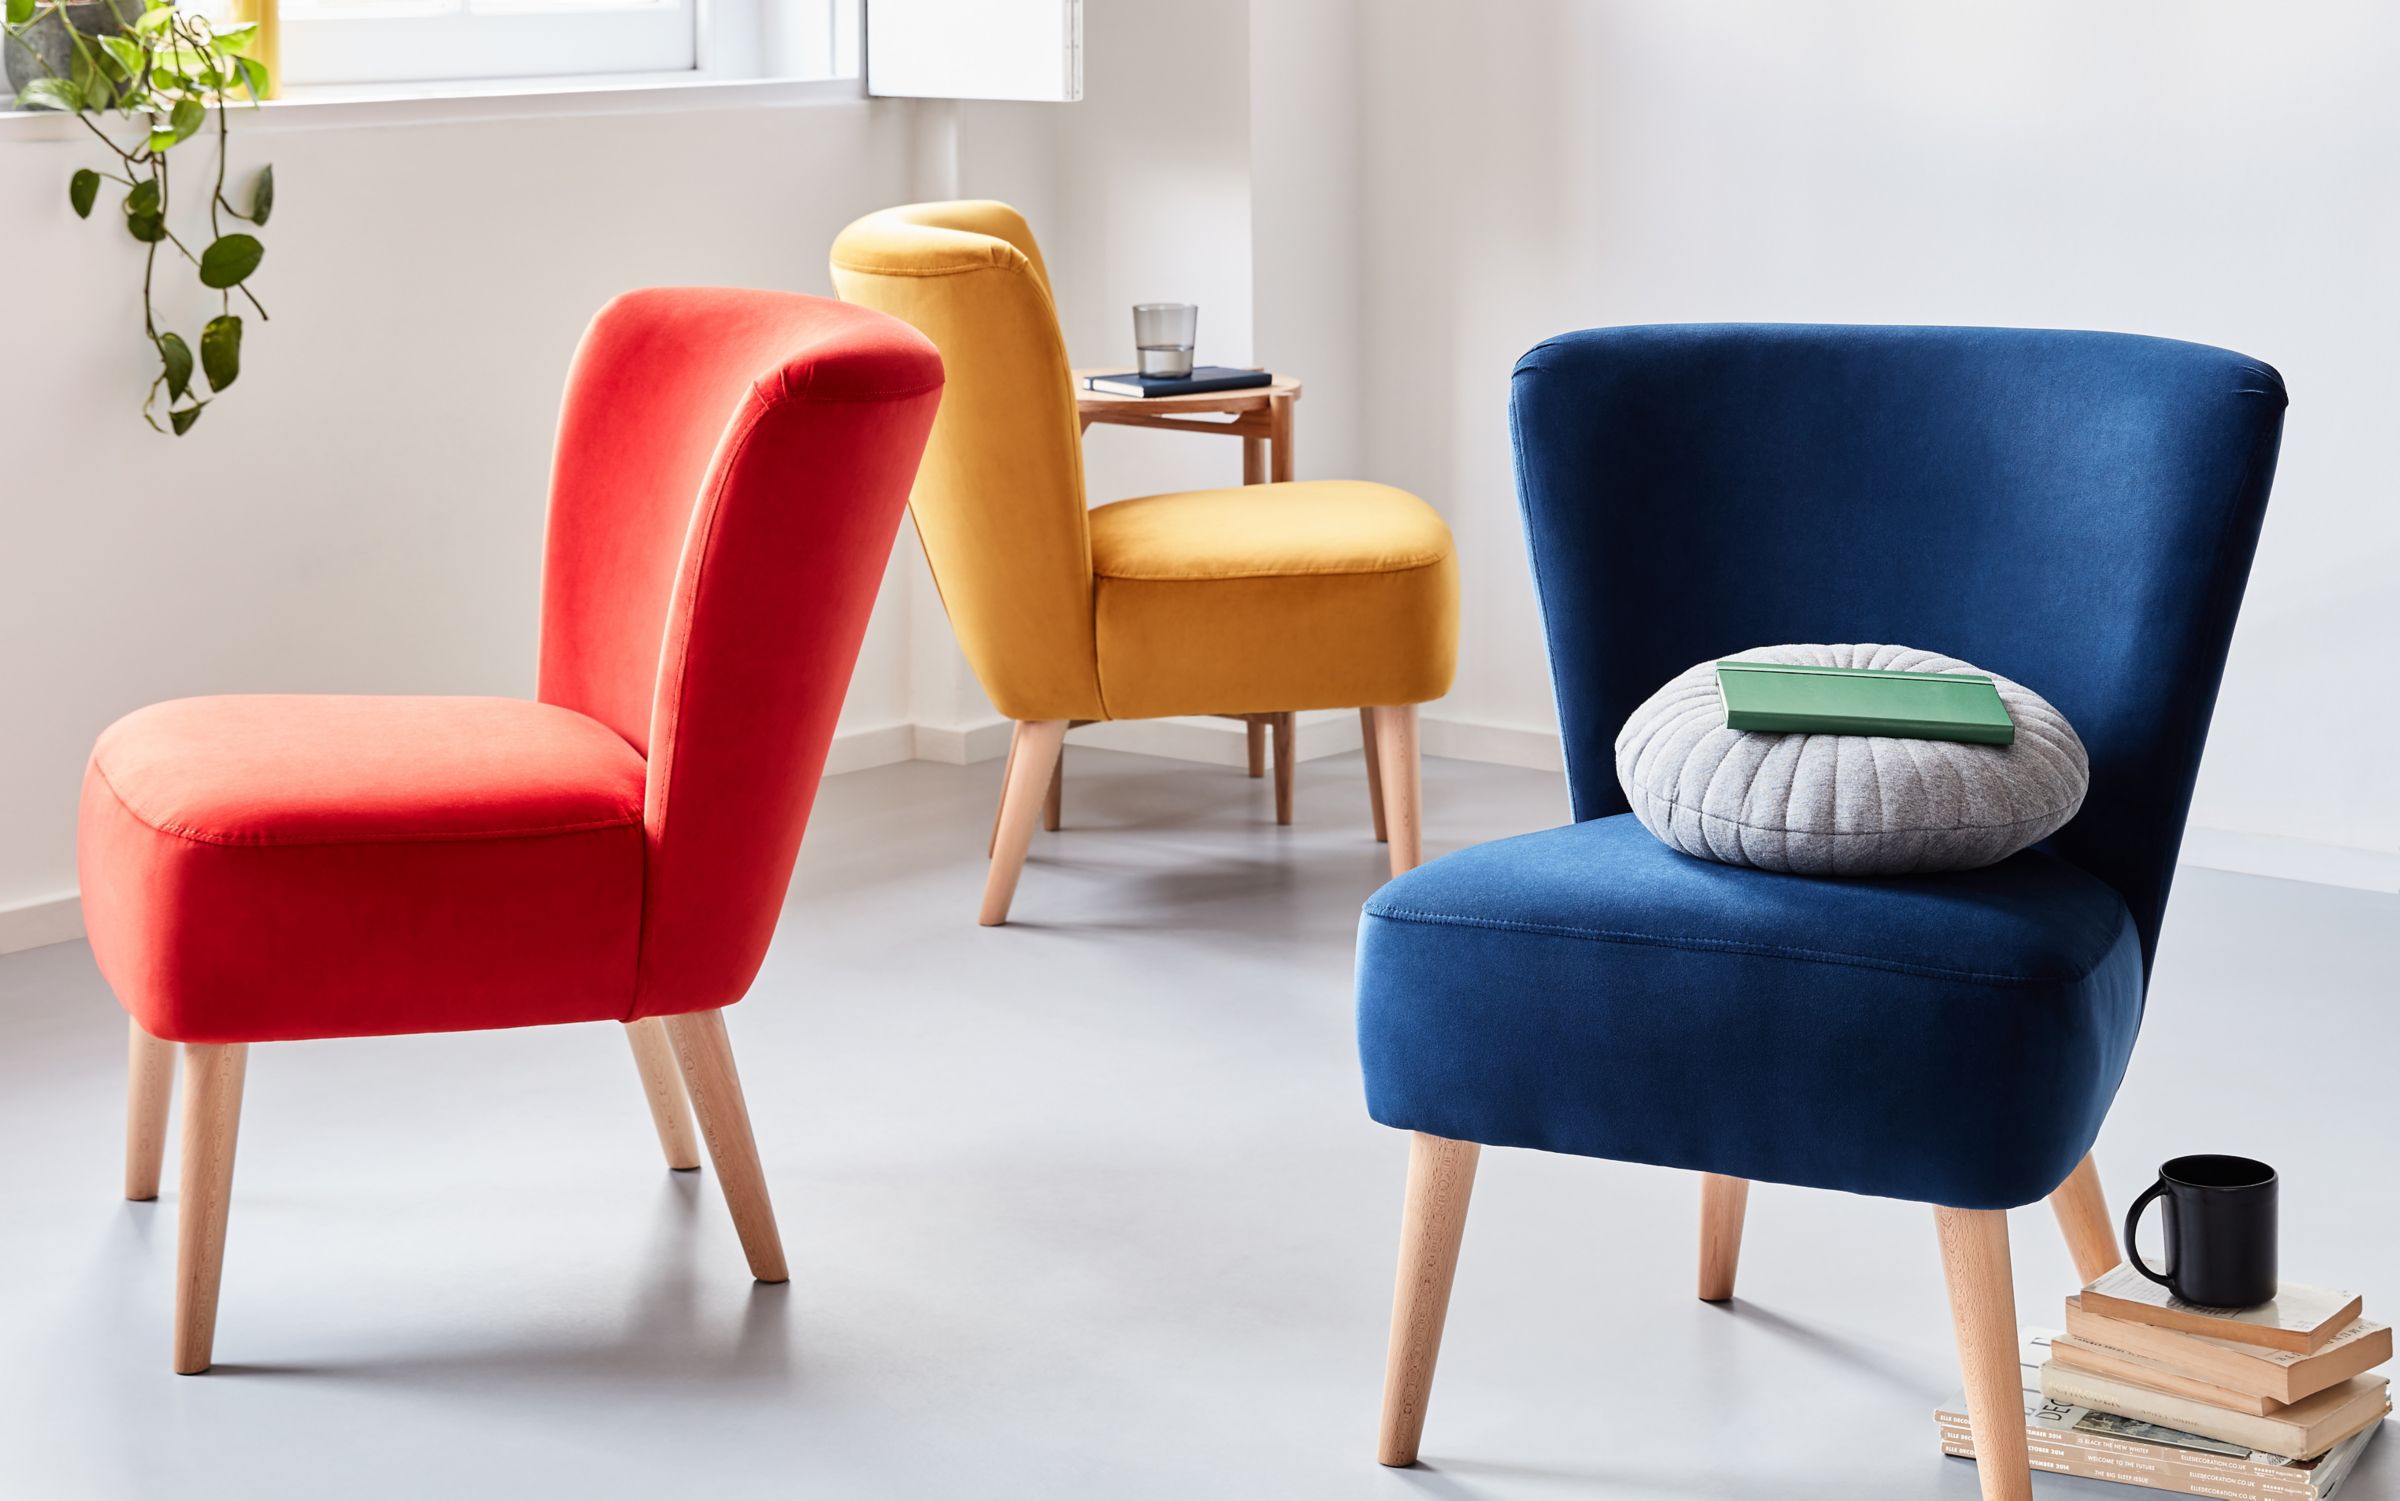 Colourful armchairs in a living room